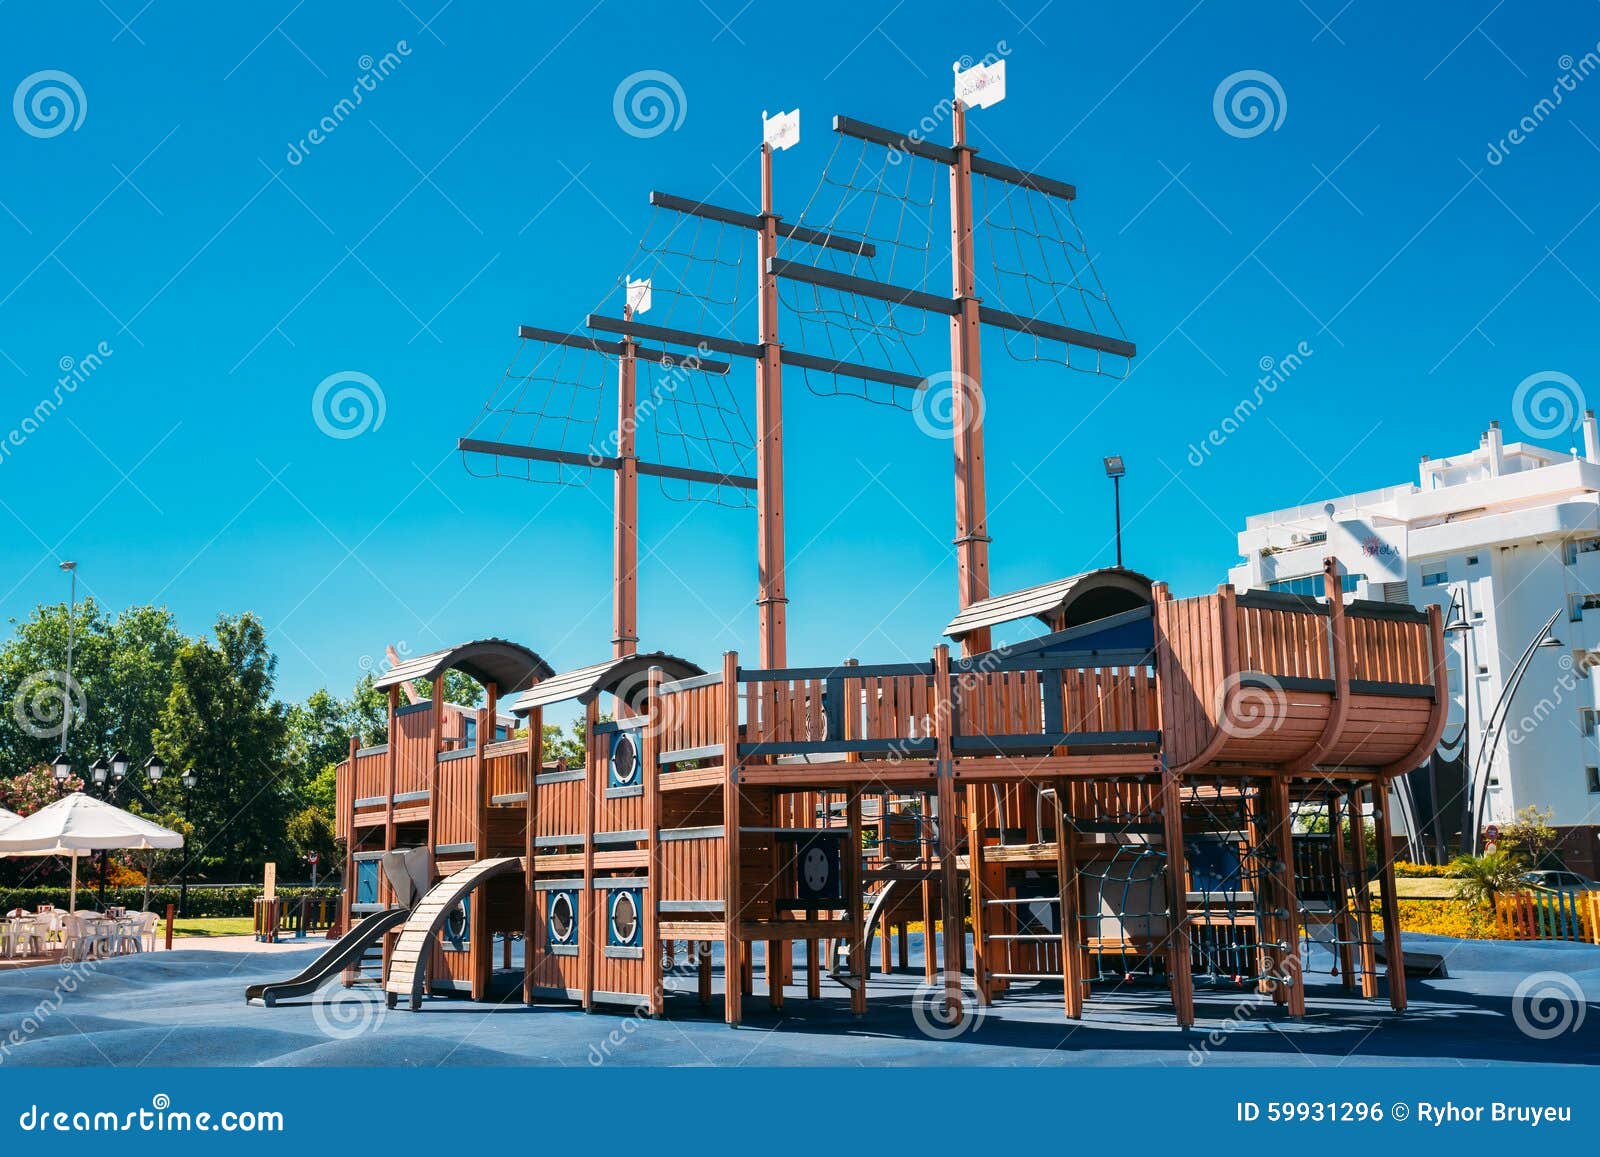 Child Playground Shaped Old Wooden Pirate Ship In ...